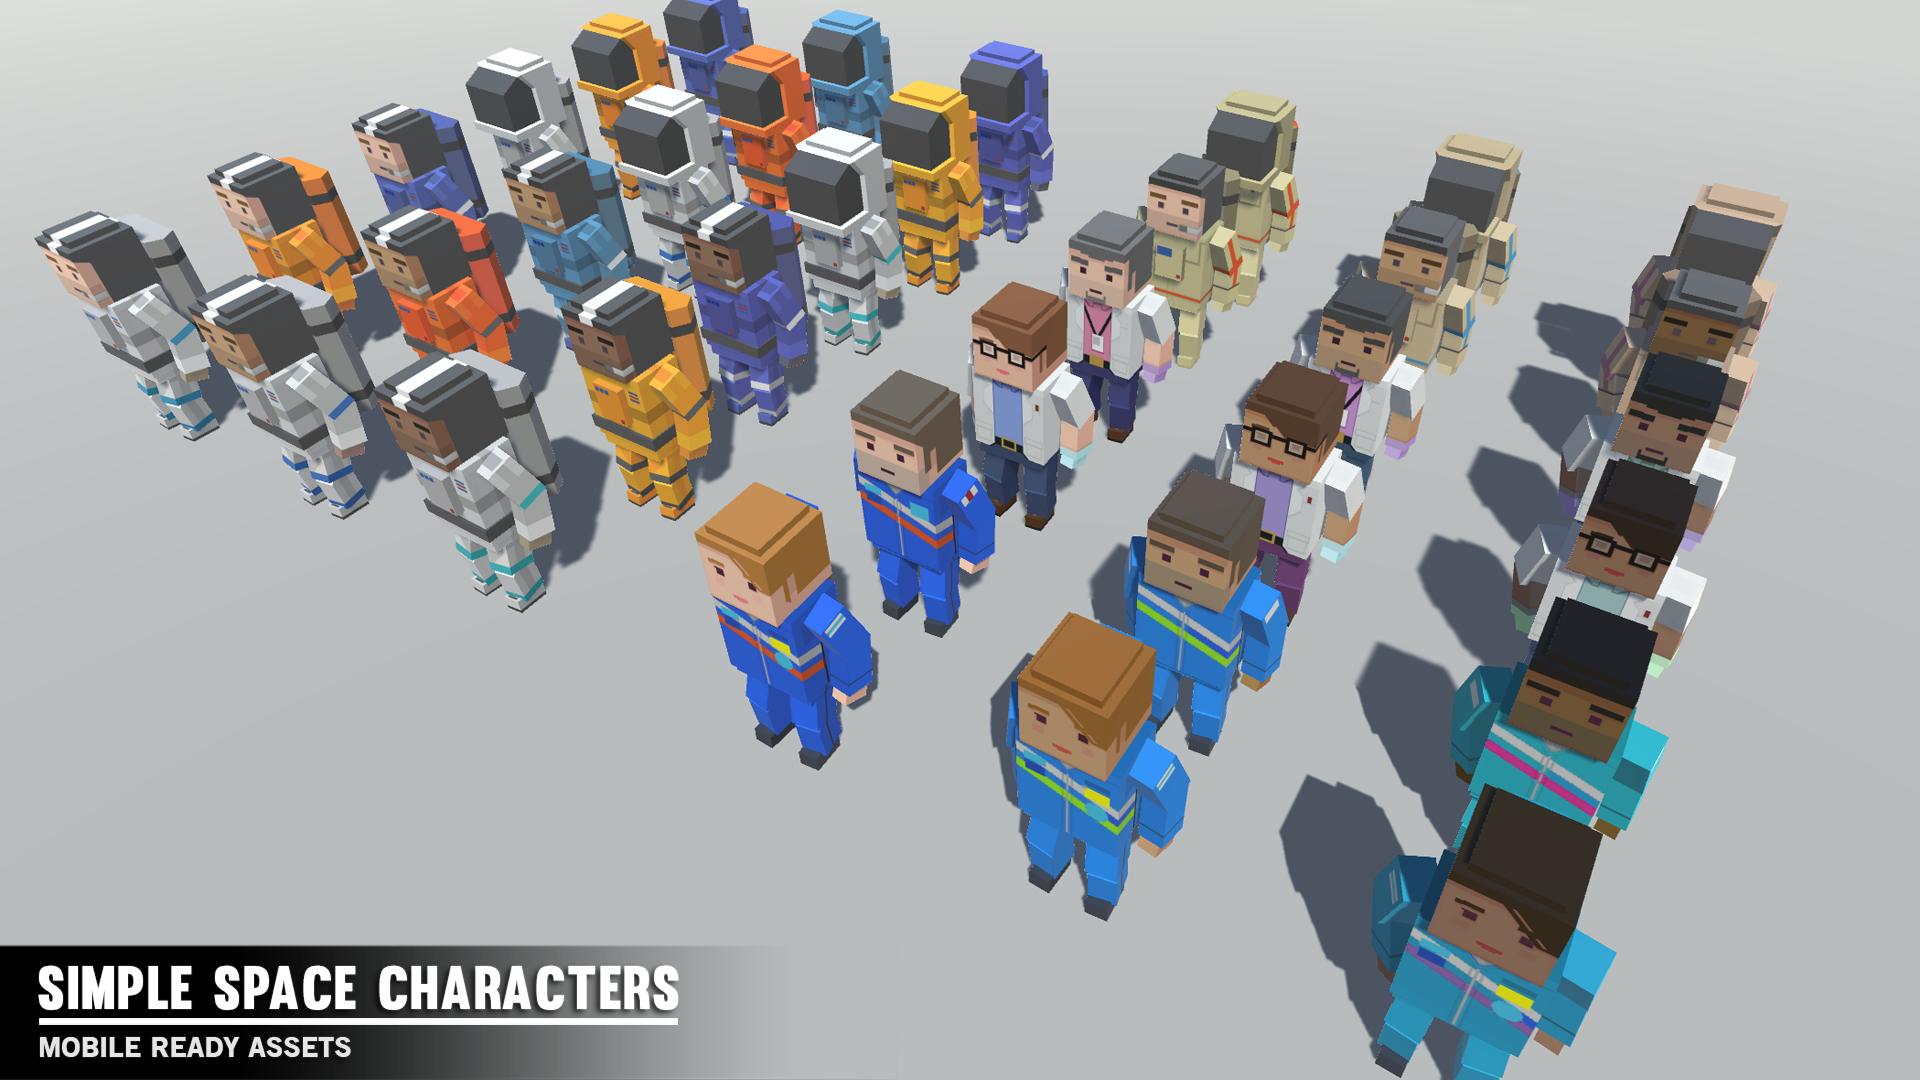 Simple Space characters standing together in a square formation to show off the many character asset variations available in the game dev pack